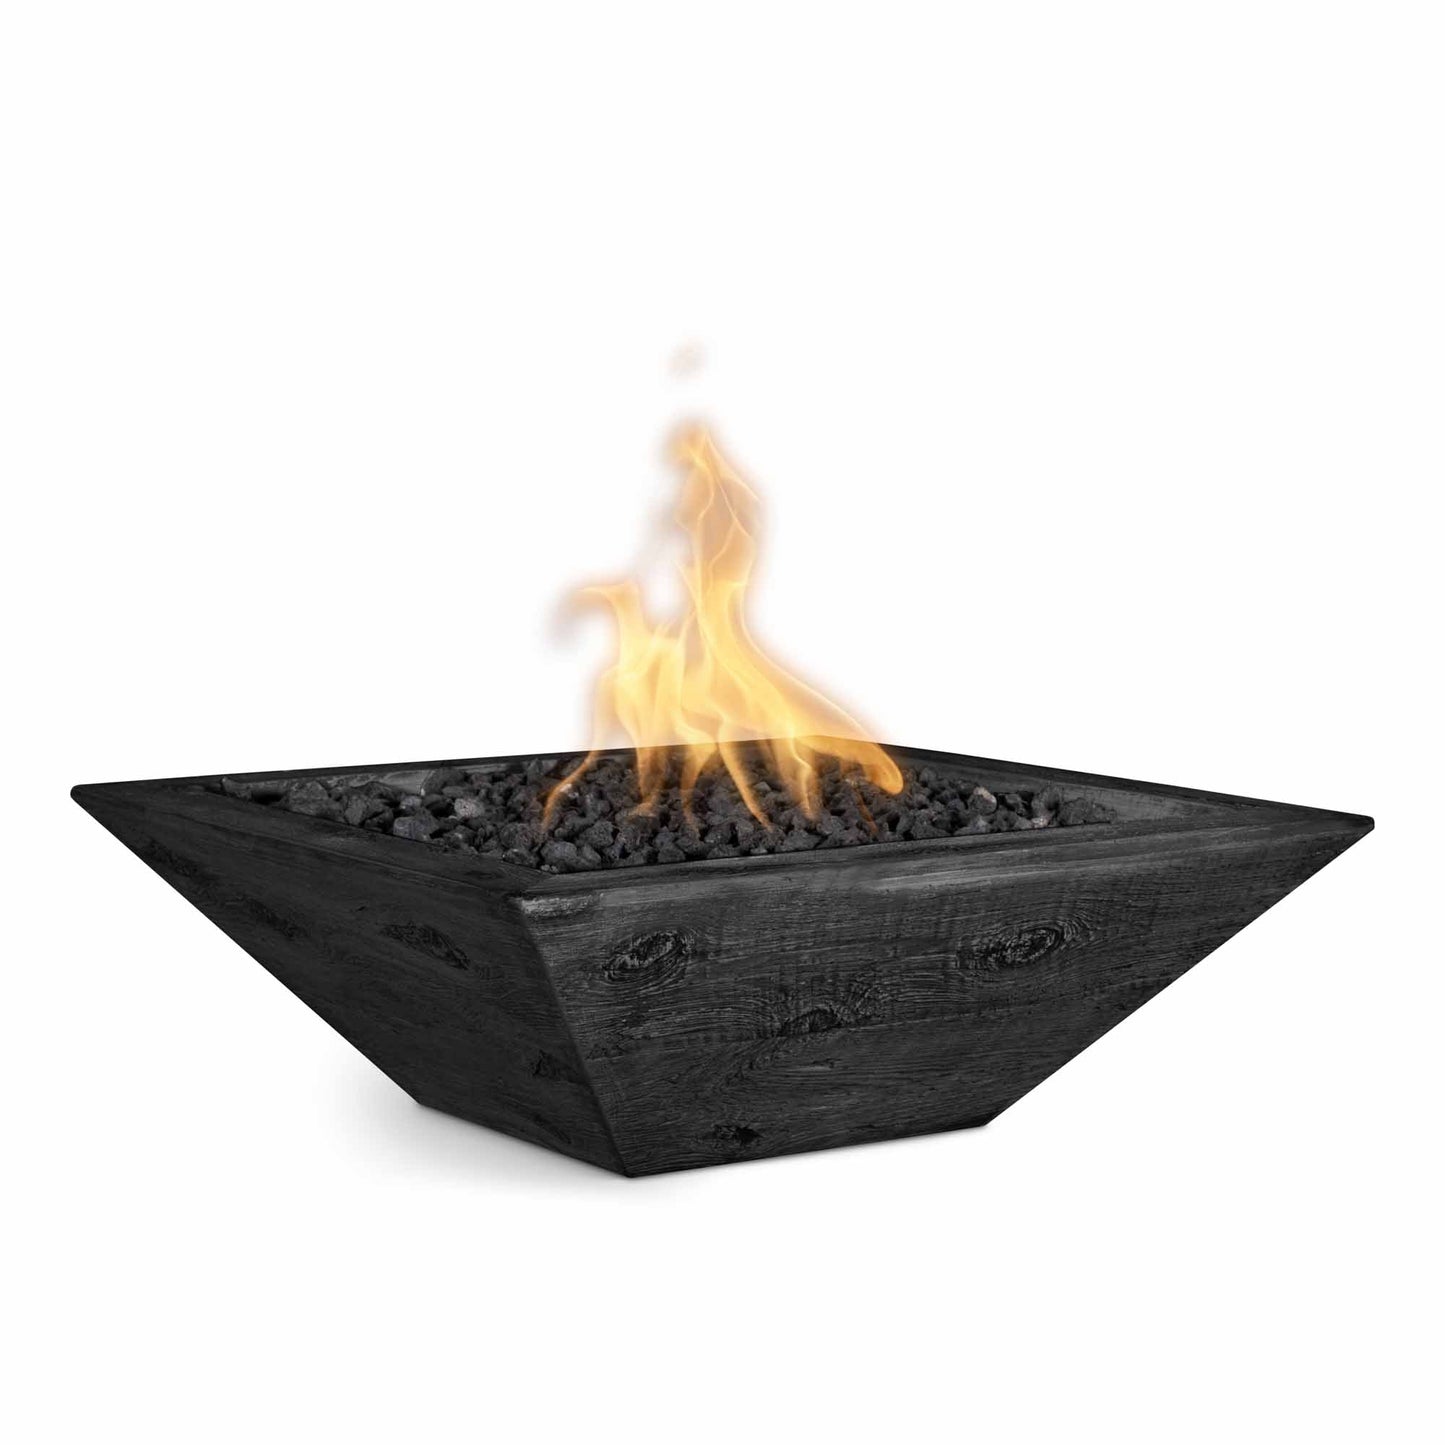 The Outdoor Plus Square Maya 24" Ebony Wood Grain Liquid Propane Fire Bowl with Match Lit with Flame Sense Ignition